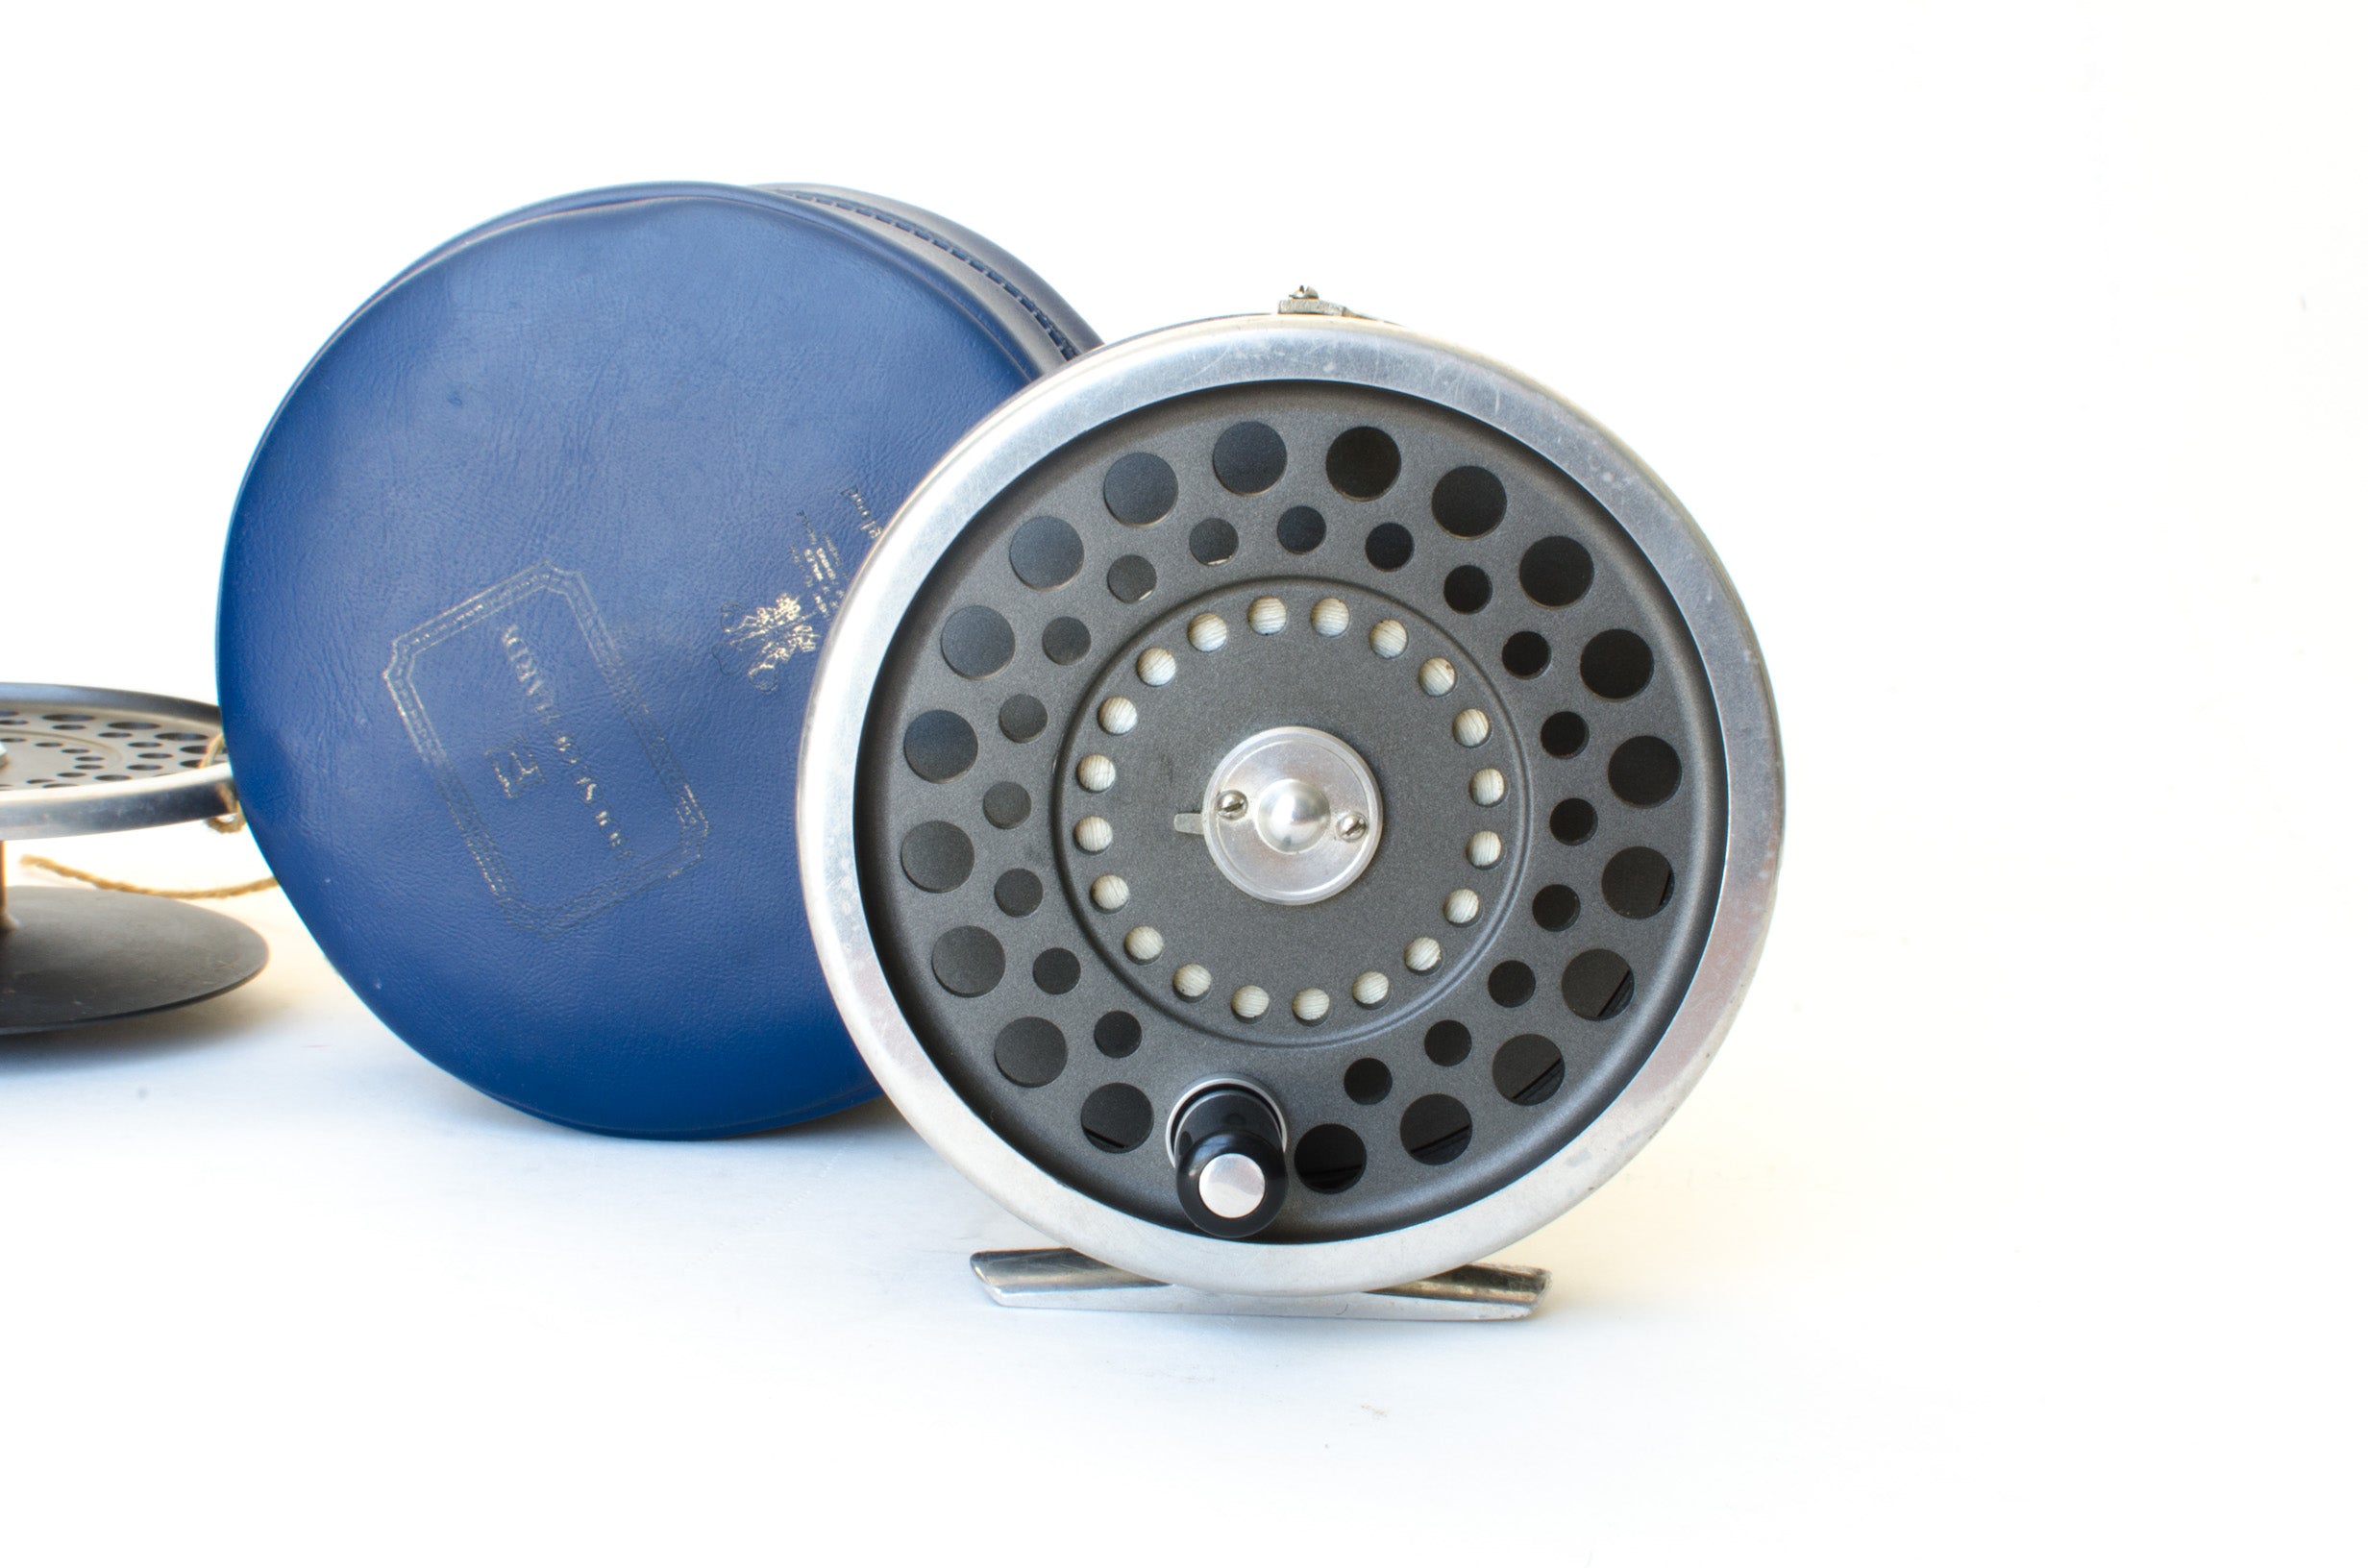 Hardy Marquis no 1 salmon fly reel with case